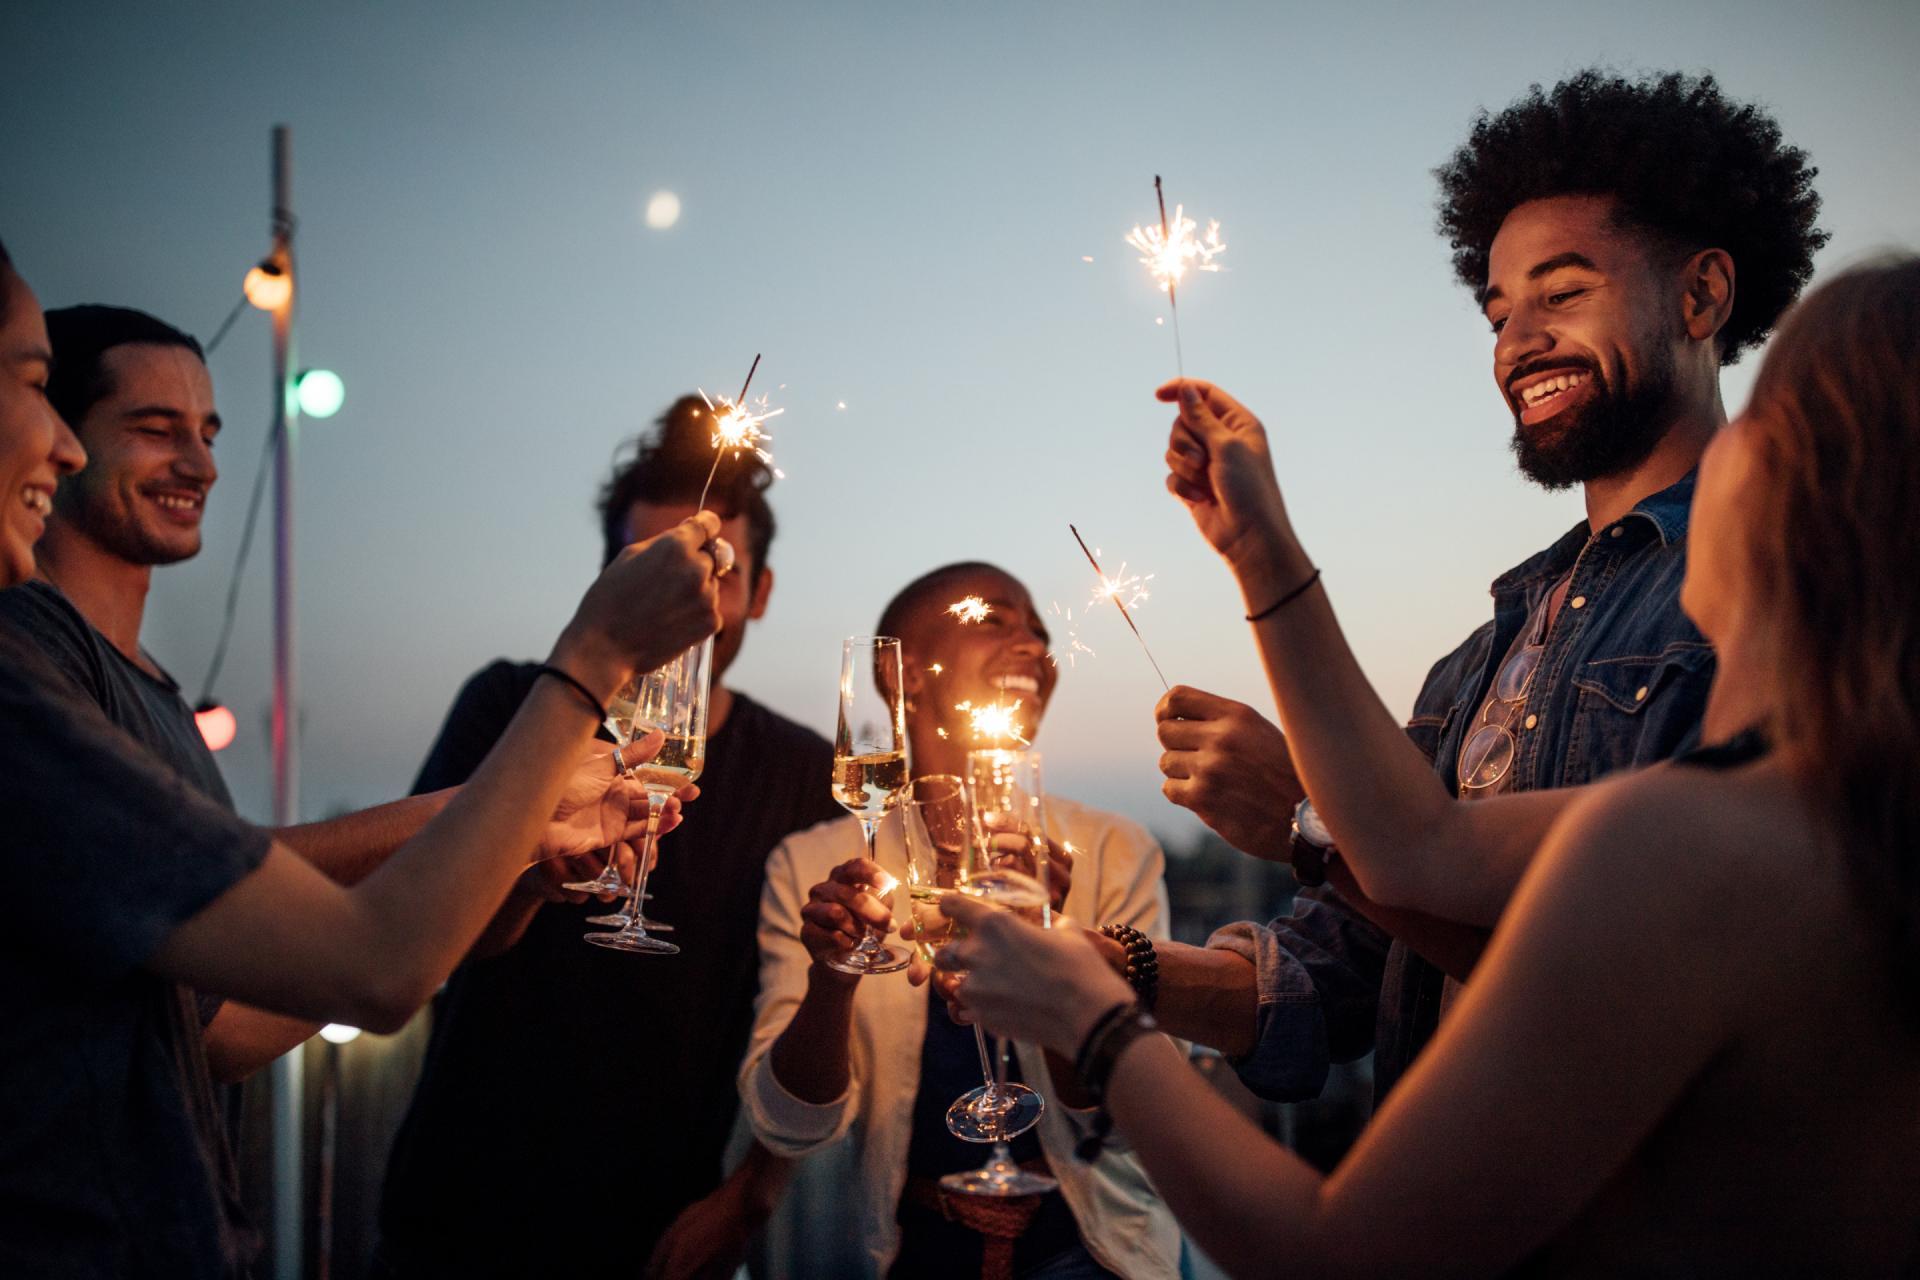 A multiethnic group of people toasting champagne glasses and holding sparklers at twilight